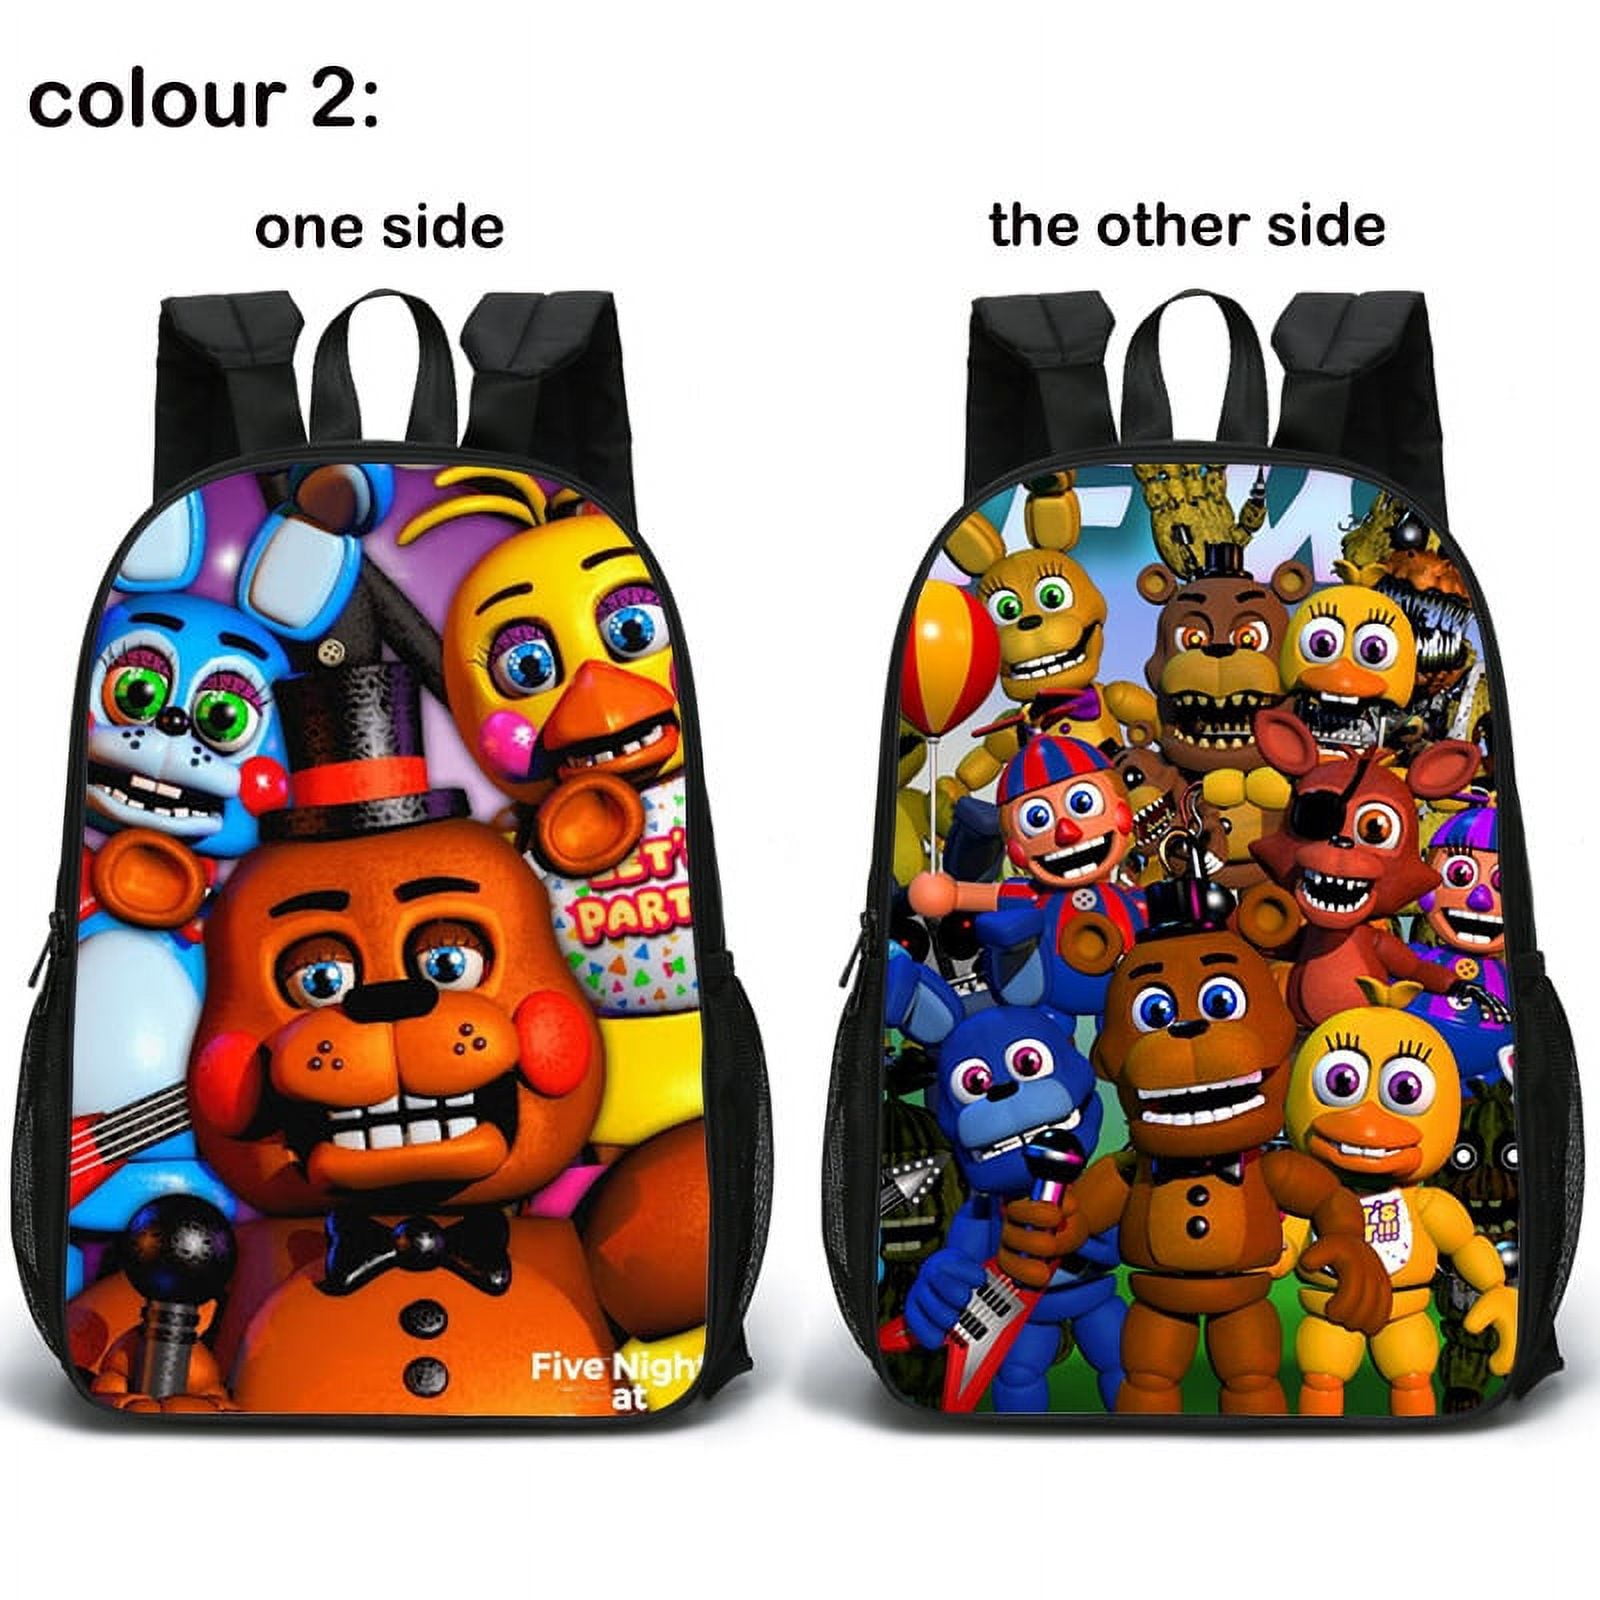 Five Nights at Freddy's 17.5 Large School Backpack